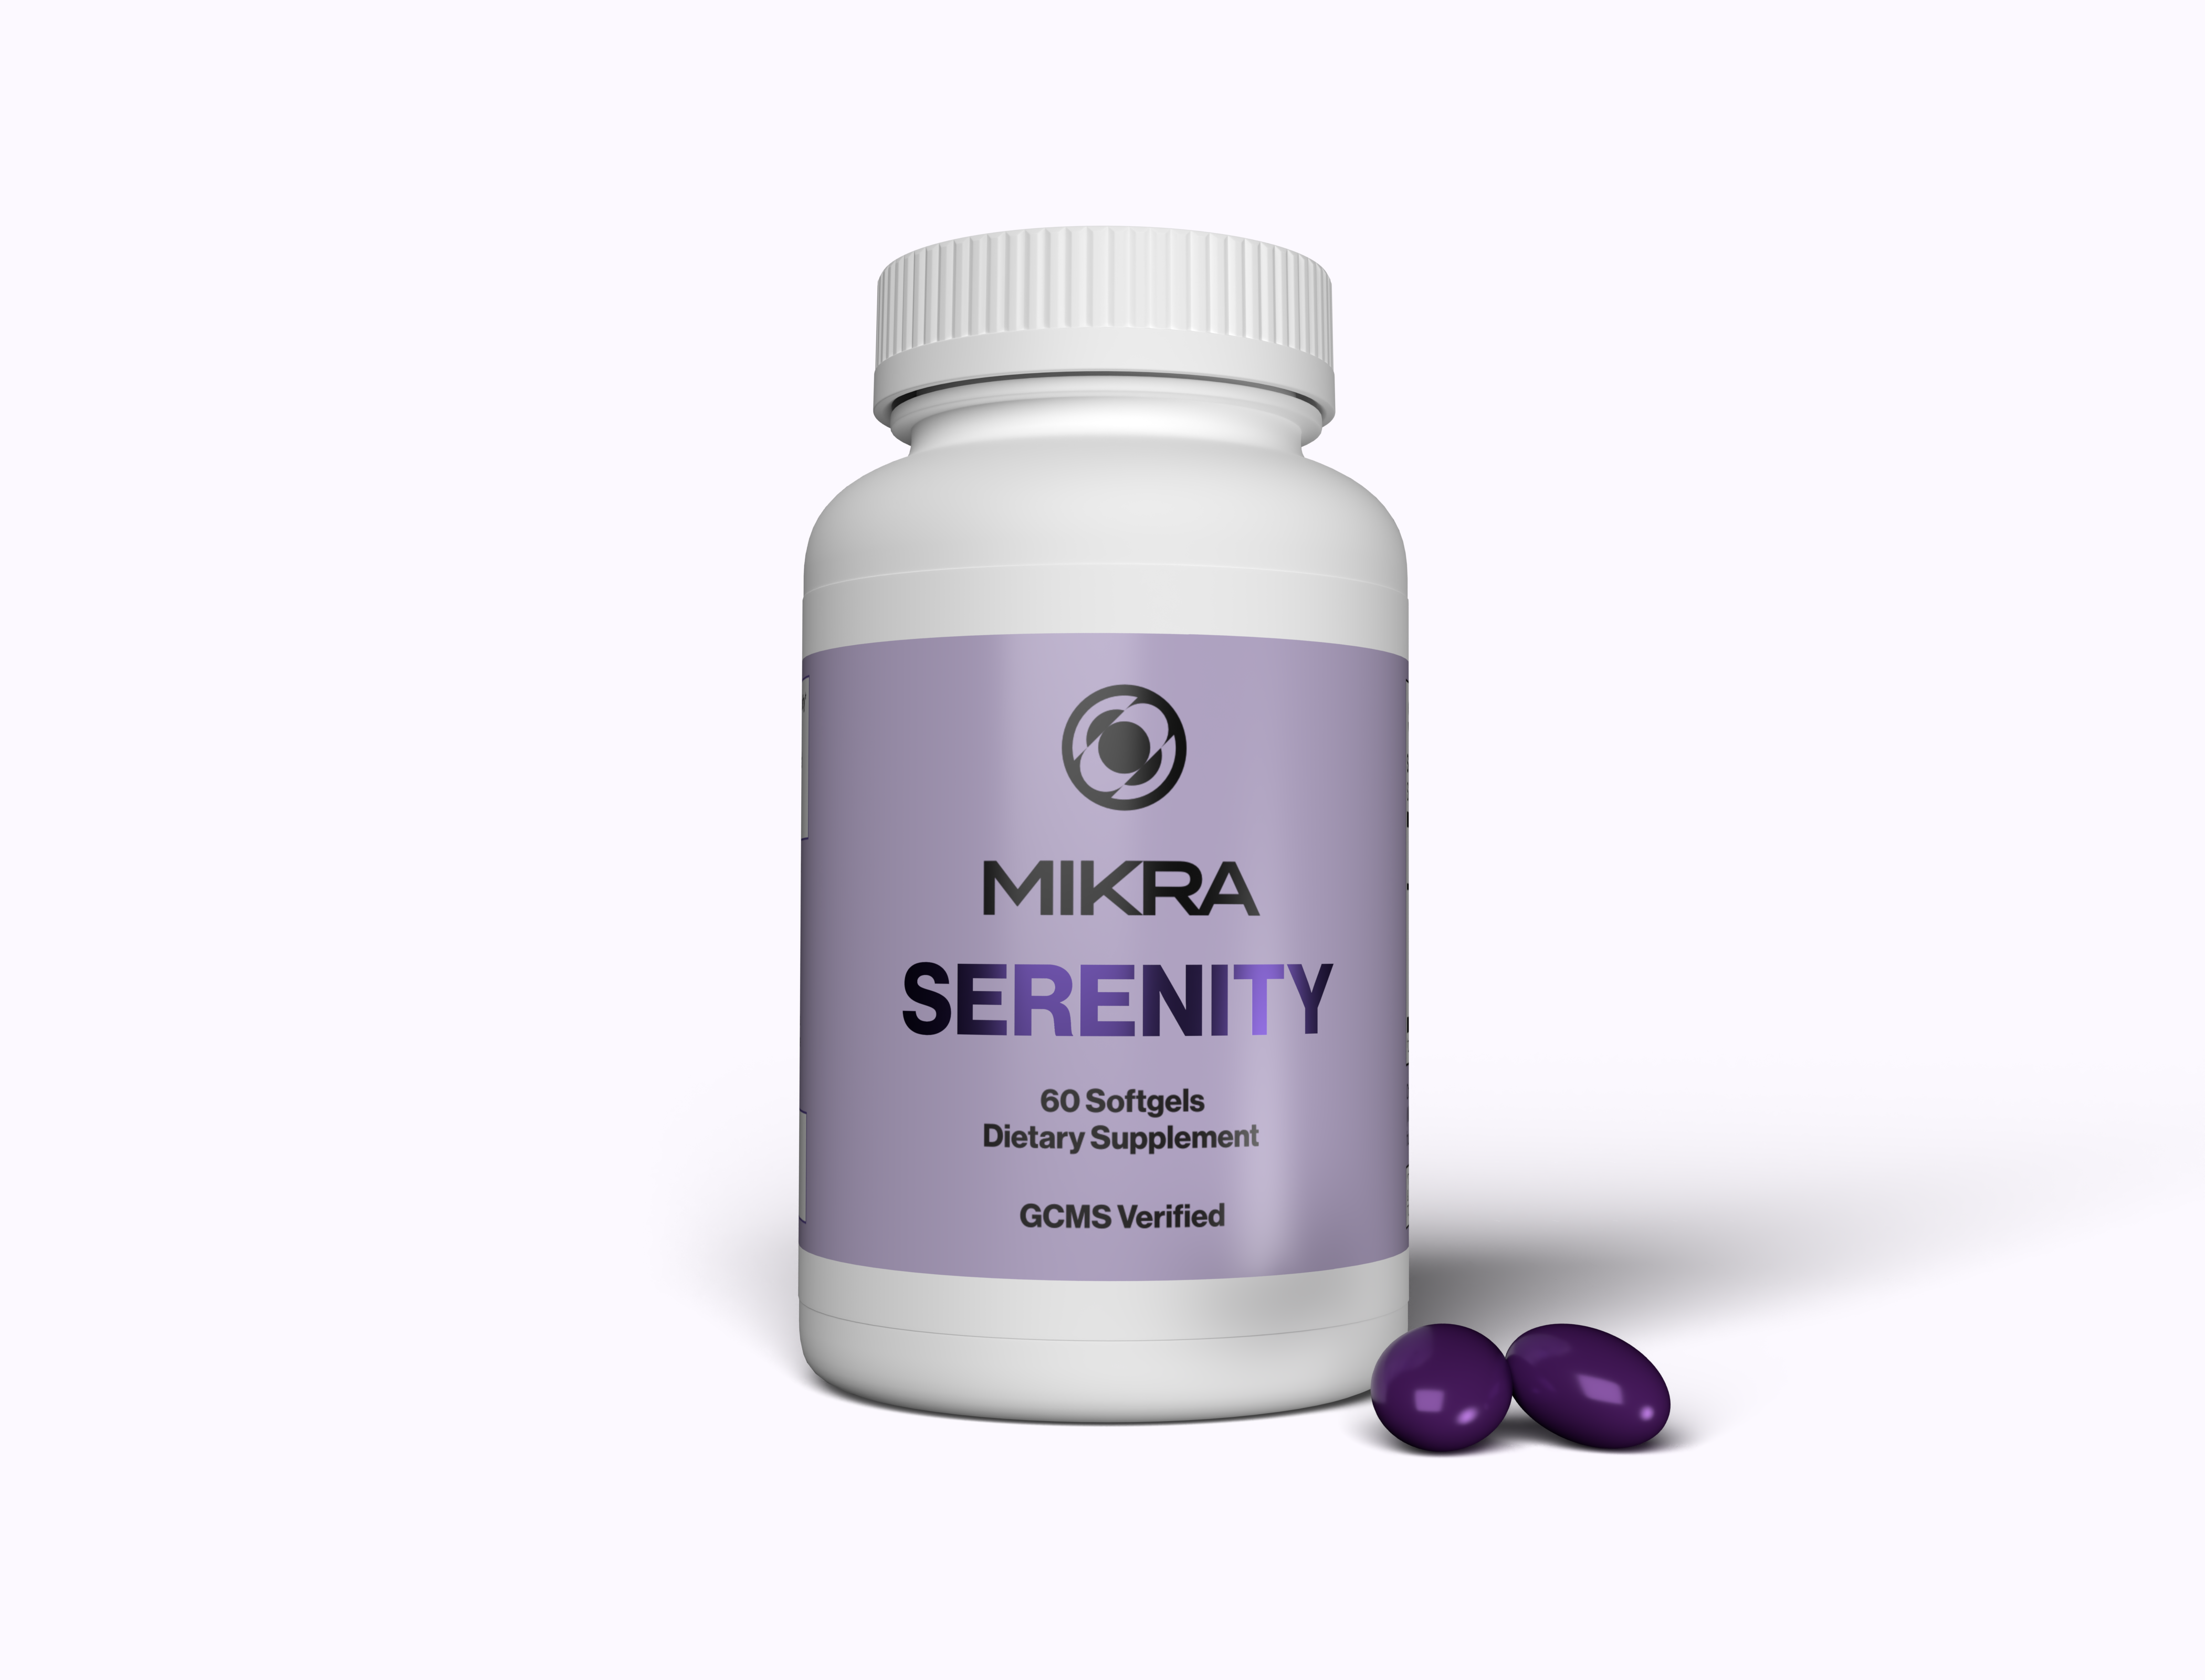 Mikra Serenity GCMS Verified Dietary Supplement for the Relief of Anxiety